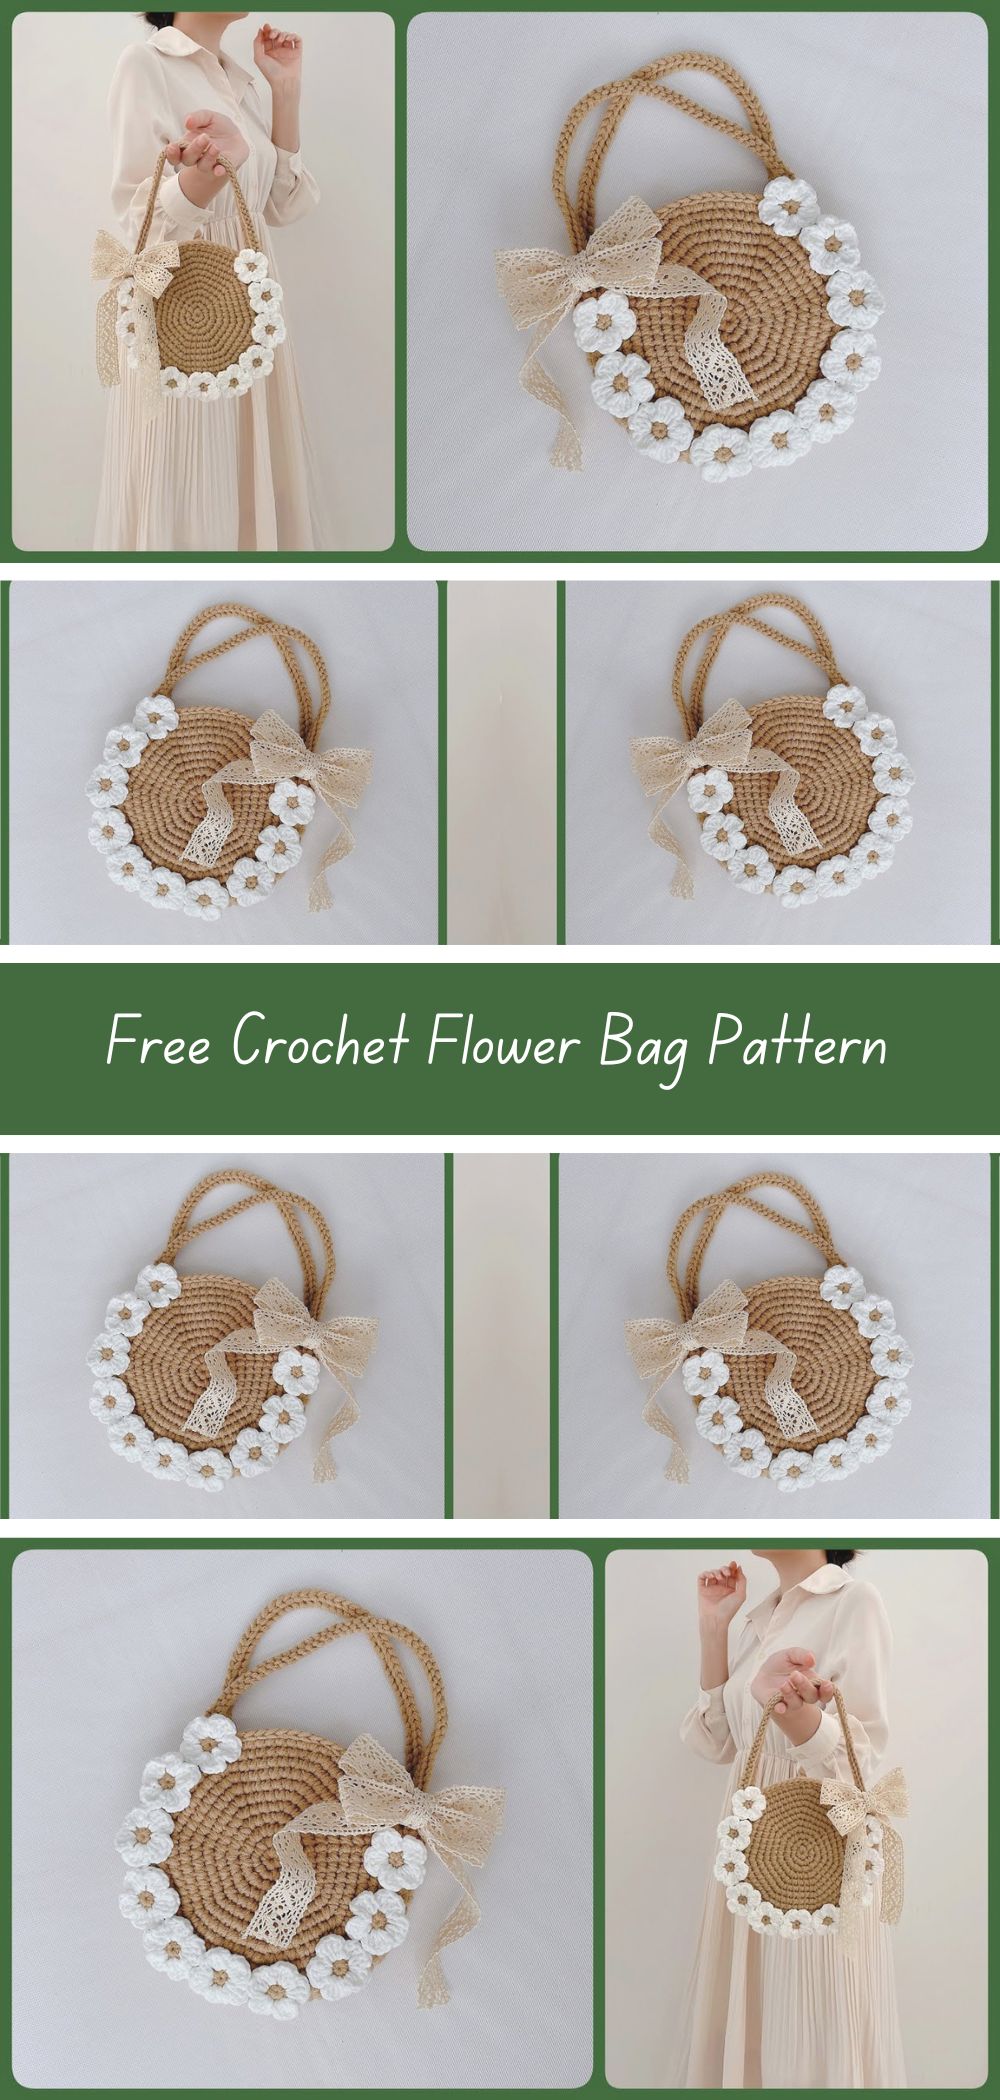 Free Crochet Flower Bag Pattern - Create a stylish and colorful bag adorned with beautiful crochet flowers with this free crochet pattern